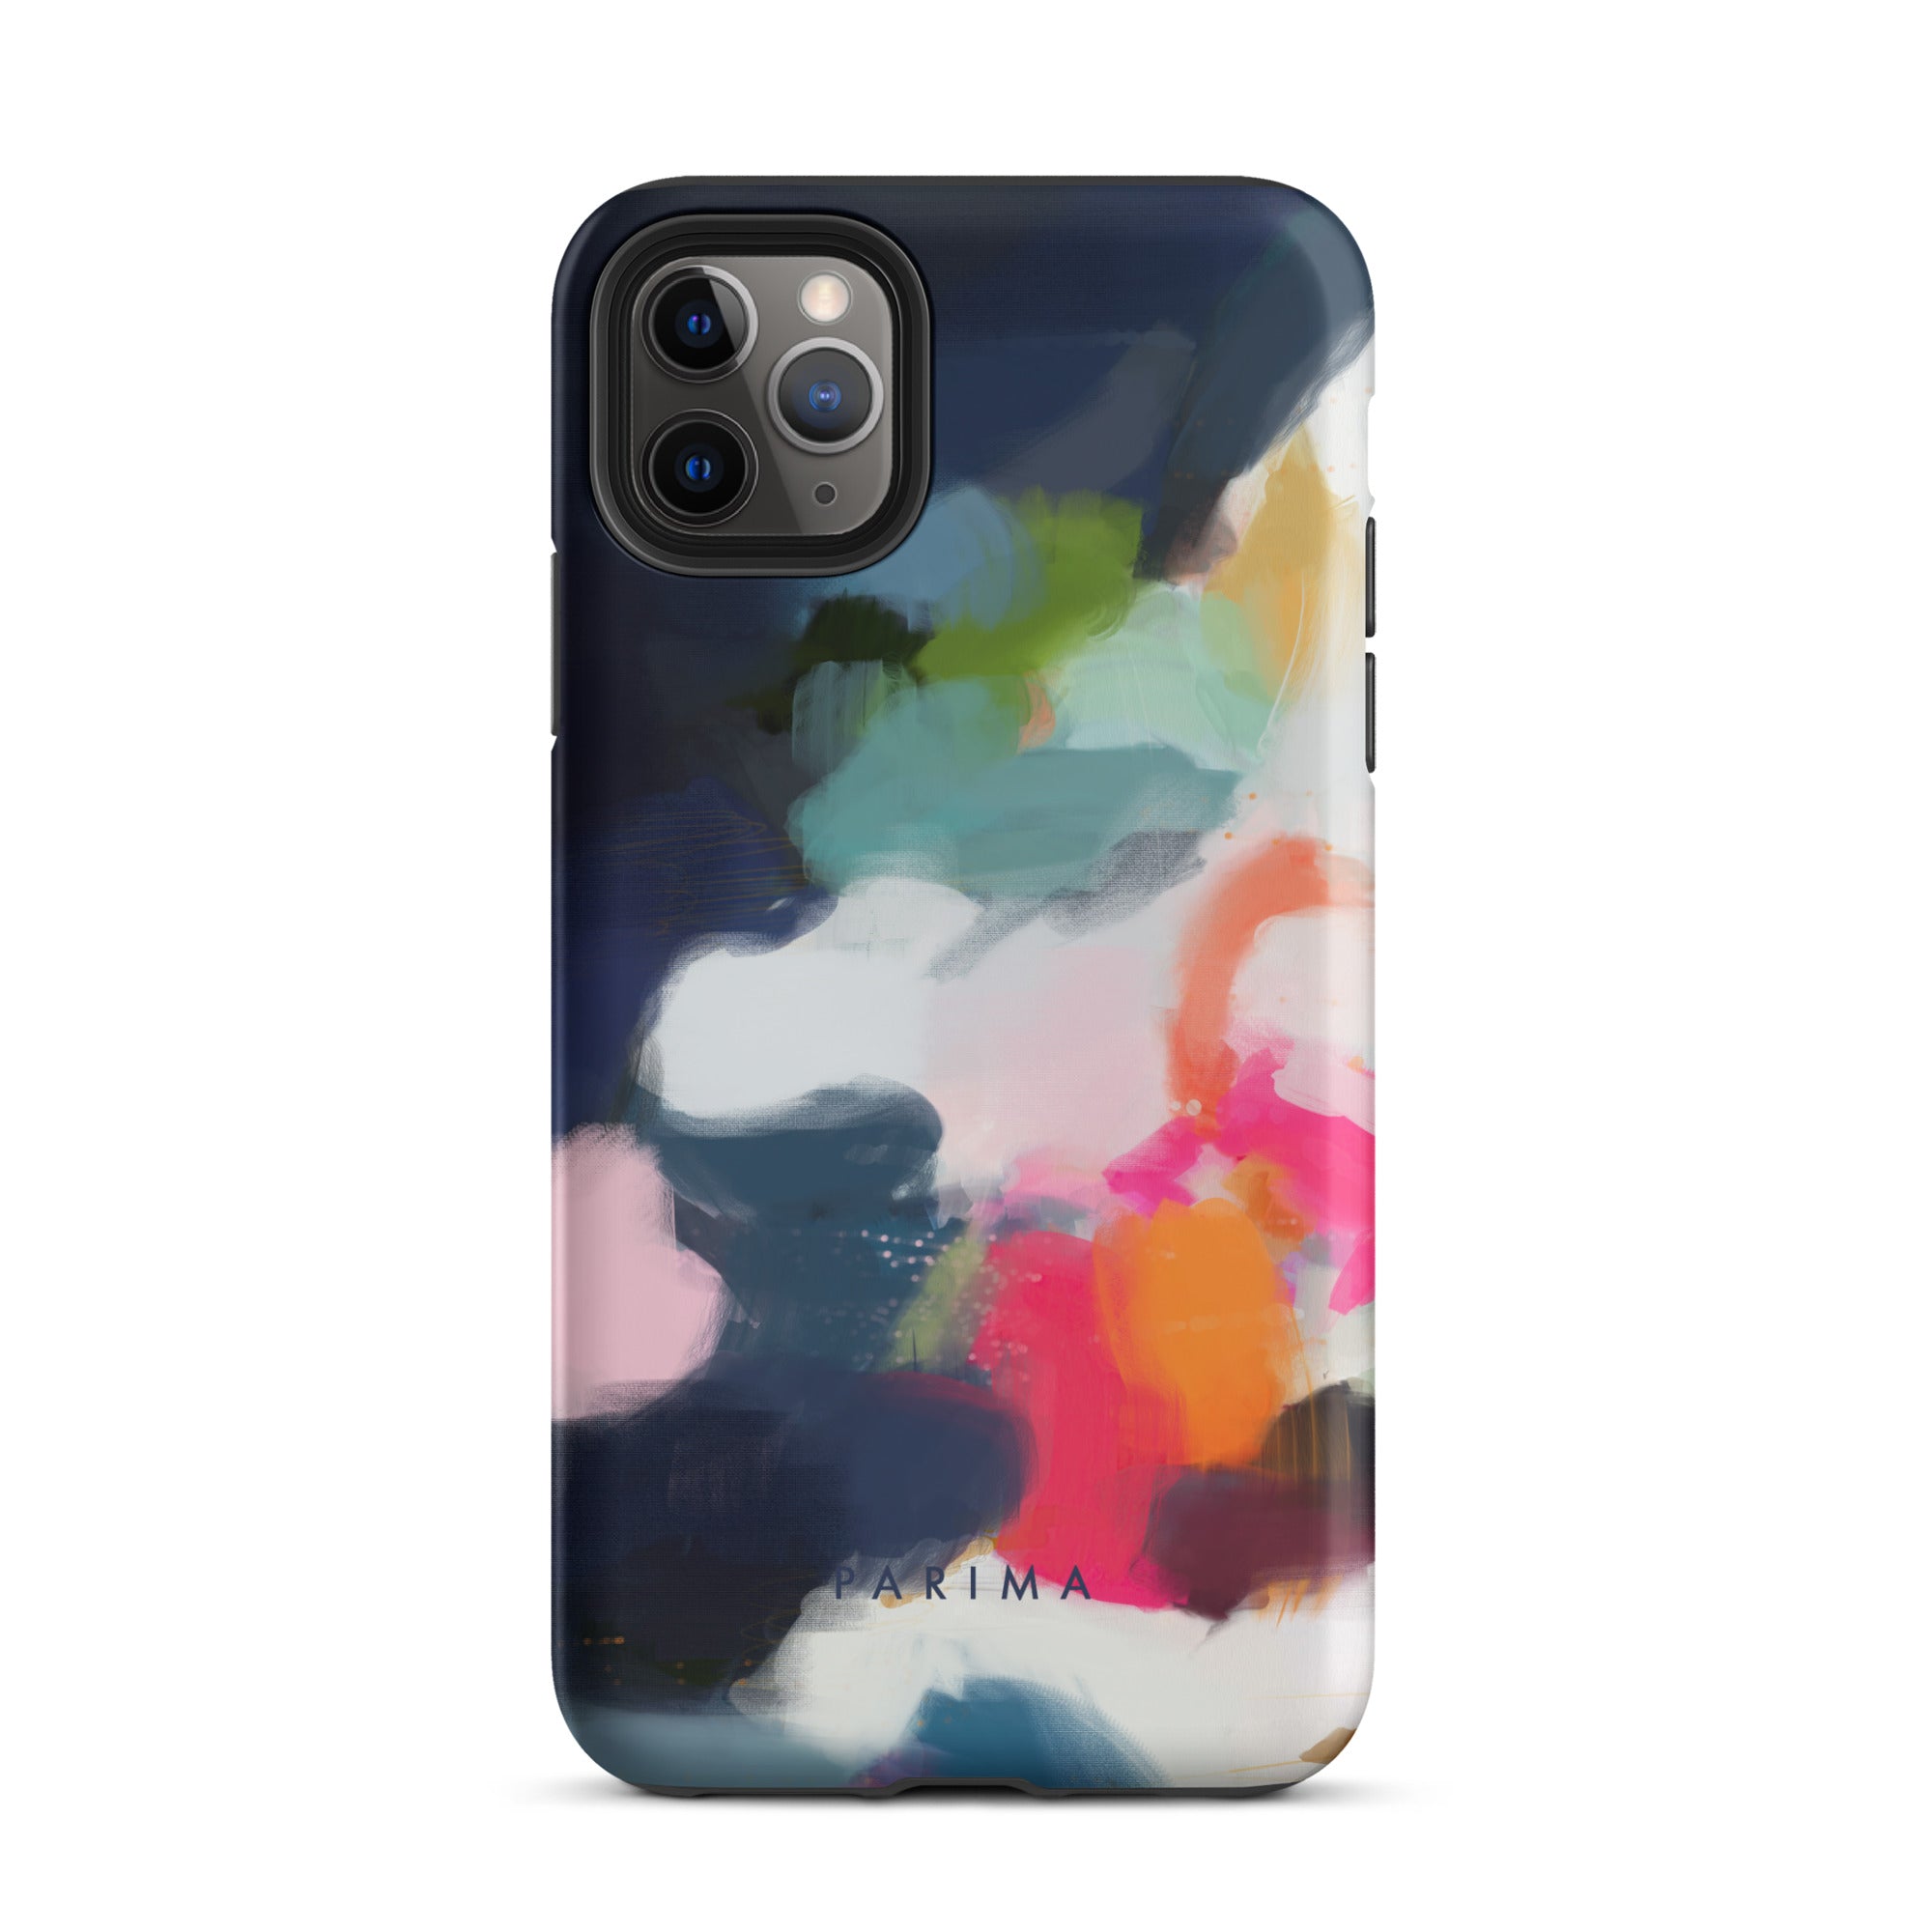 Eliza, pink and blue abstract art - iPhone 11 Pro Max tough case by Parima Studio